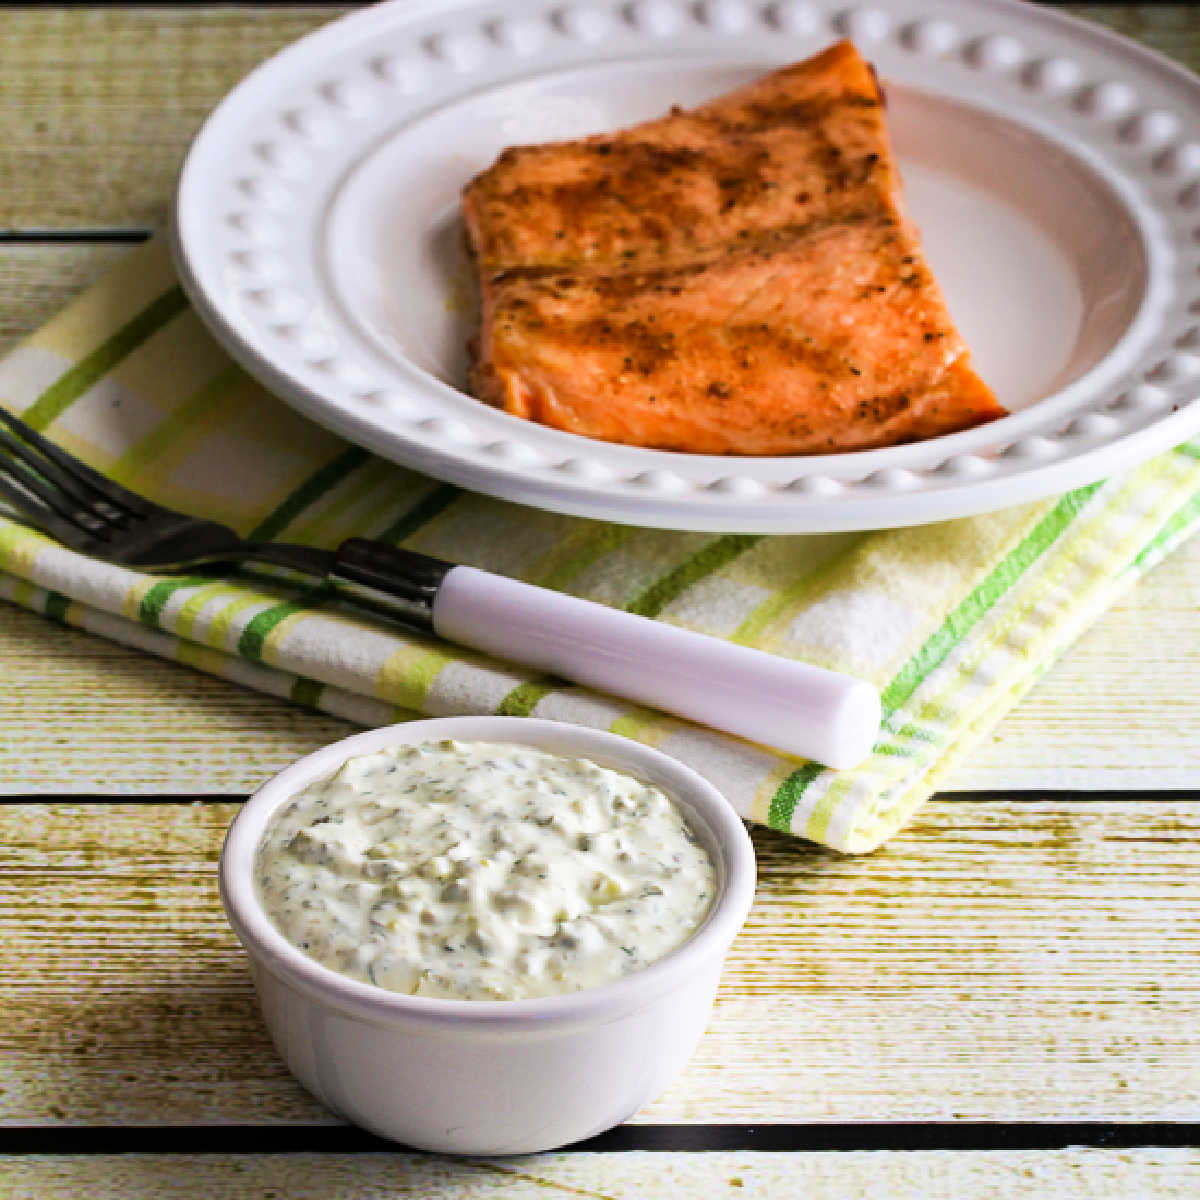 Square image of homemade tartar sauce with double dill, served with tartar sauce in a bowl and cooked salmon on a plate in the background